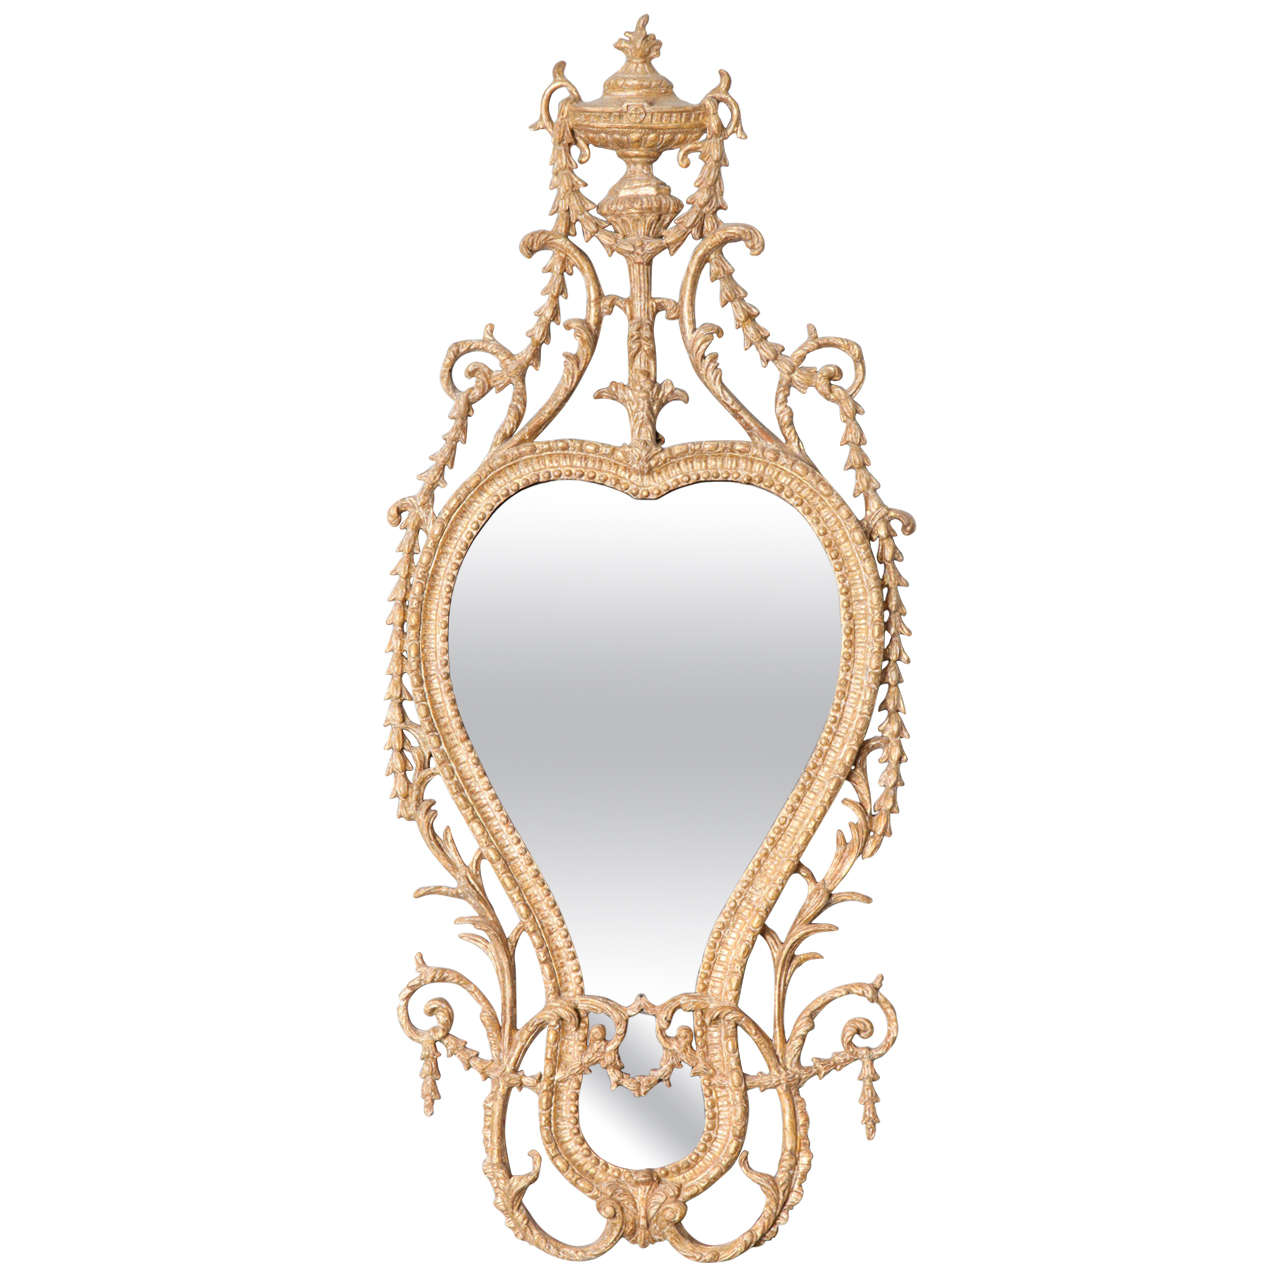 George III Gilt Carton Pierre Mirror Attributed to John Linnell For Sale